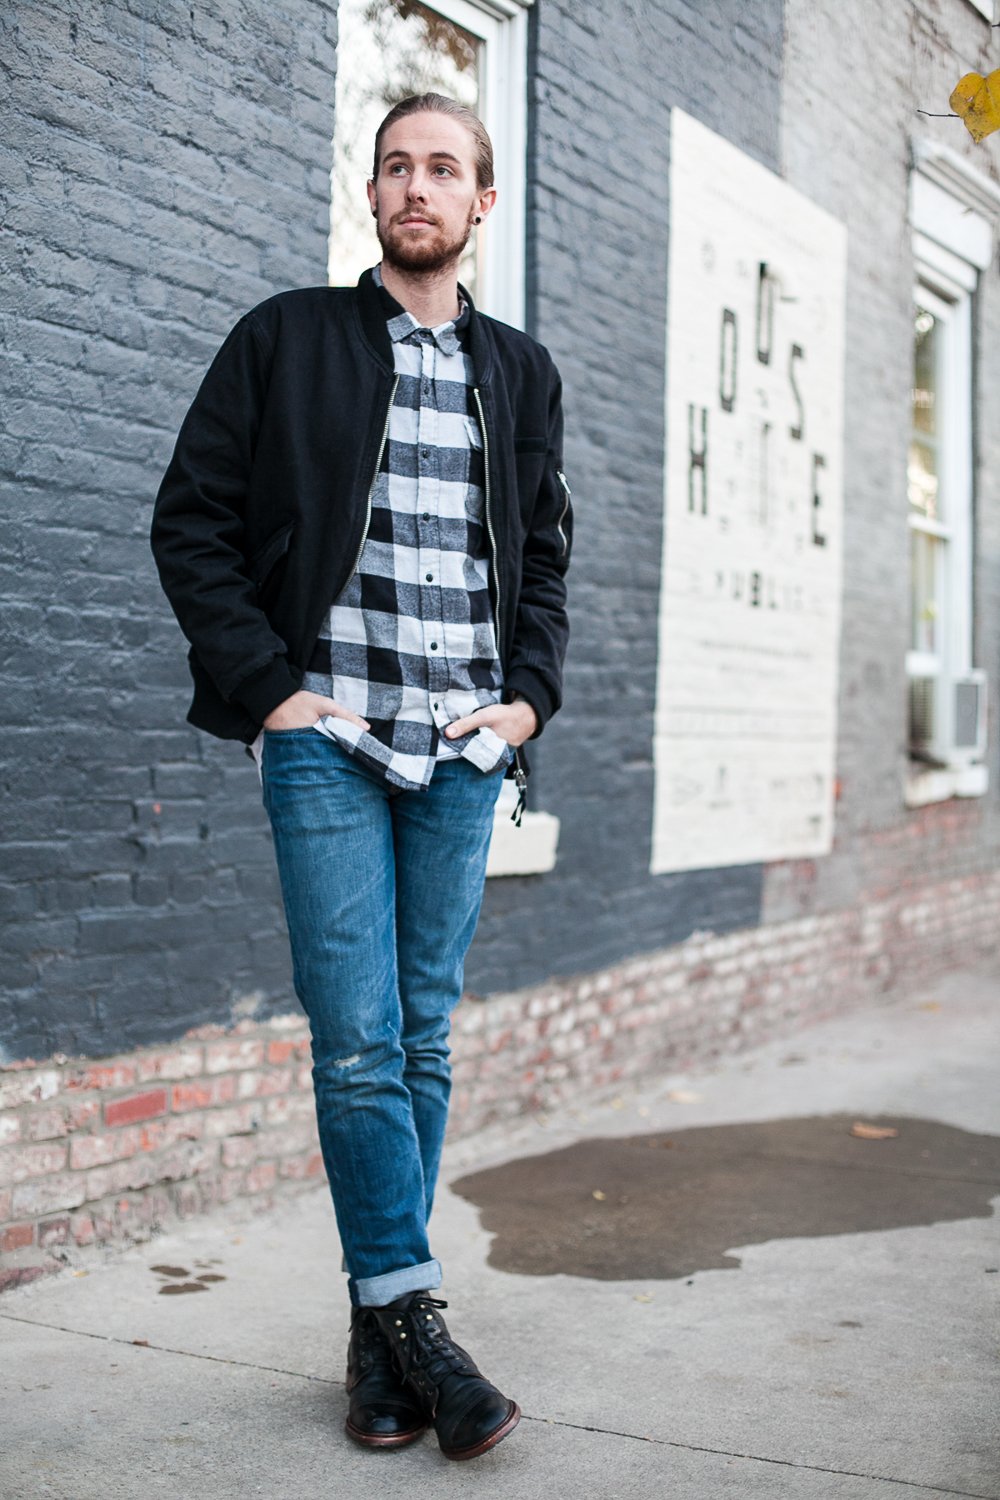 The Kentucky Gent, a Louisville, Kentucky life and style blogger, in Salt Valley Plaid Shirt, Cheap Monday Bomber Jacket, Levi's 511 Jeans, Trask Union Boots, and Richer Poorer Socks.